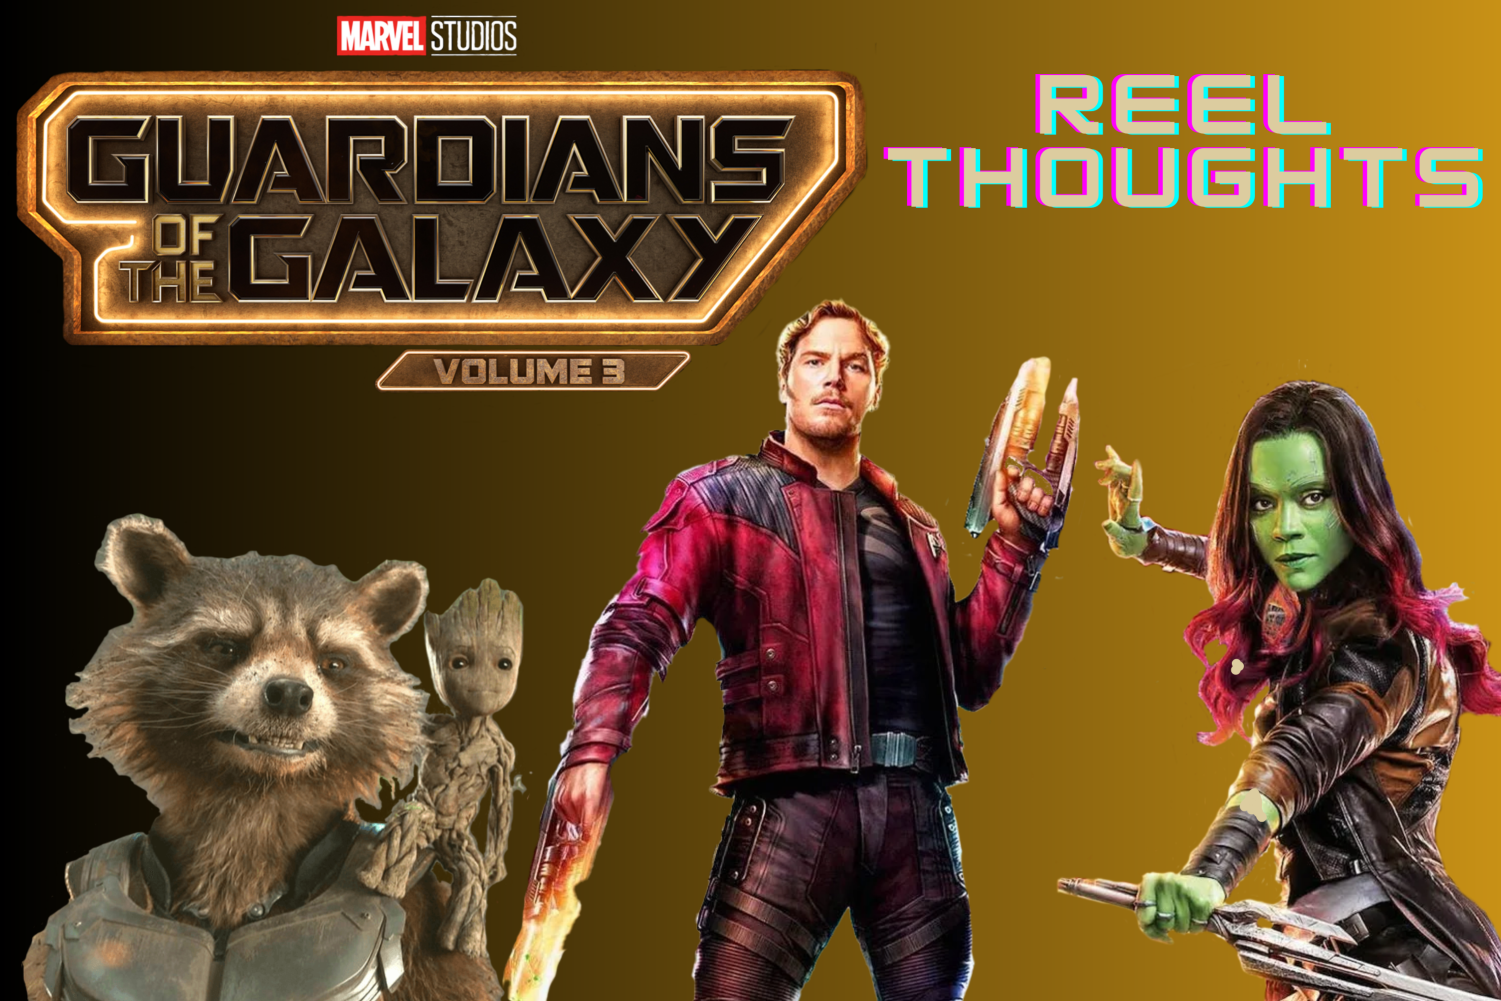 Guardians of the Galaxy (@Guardians) / X